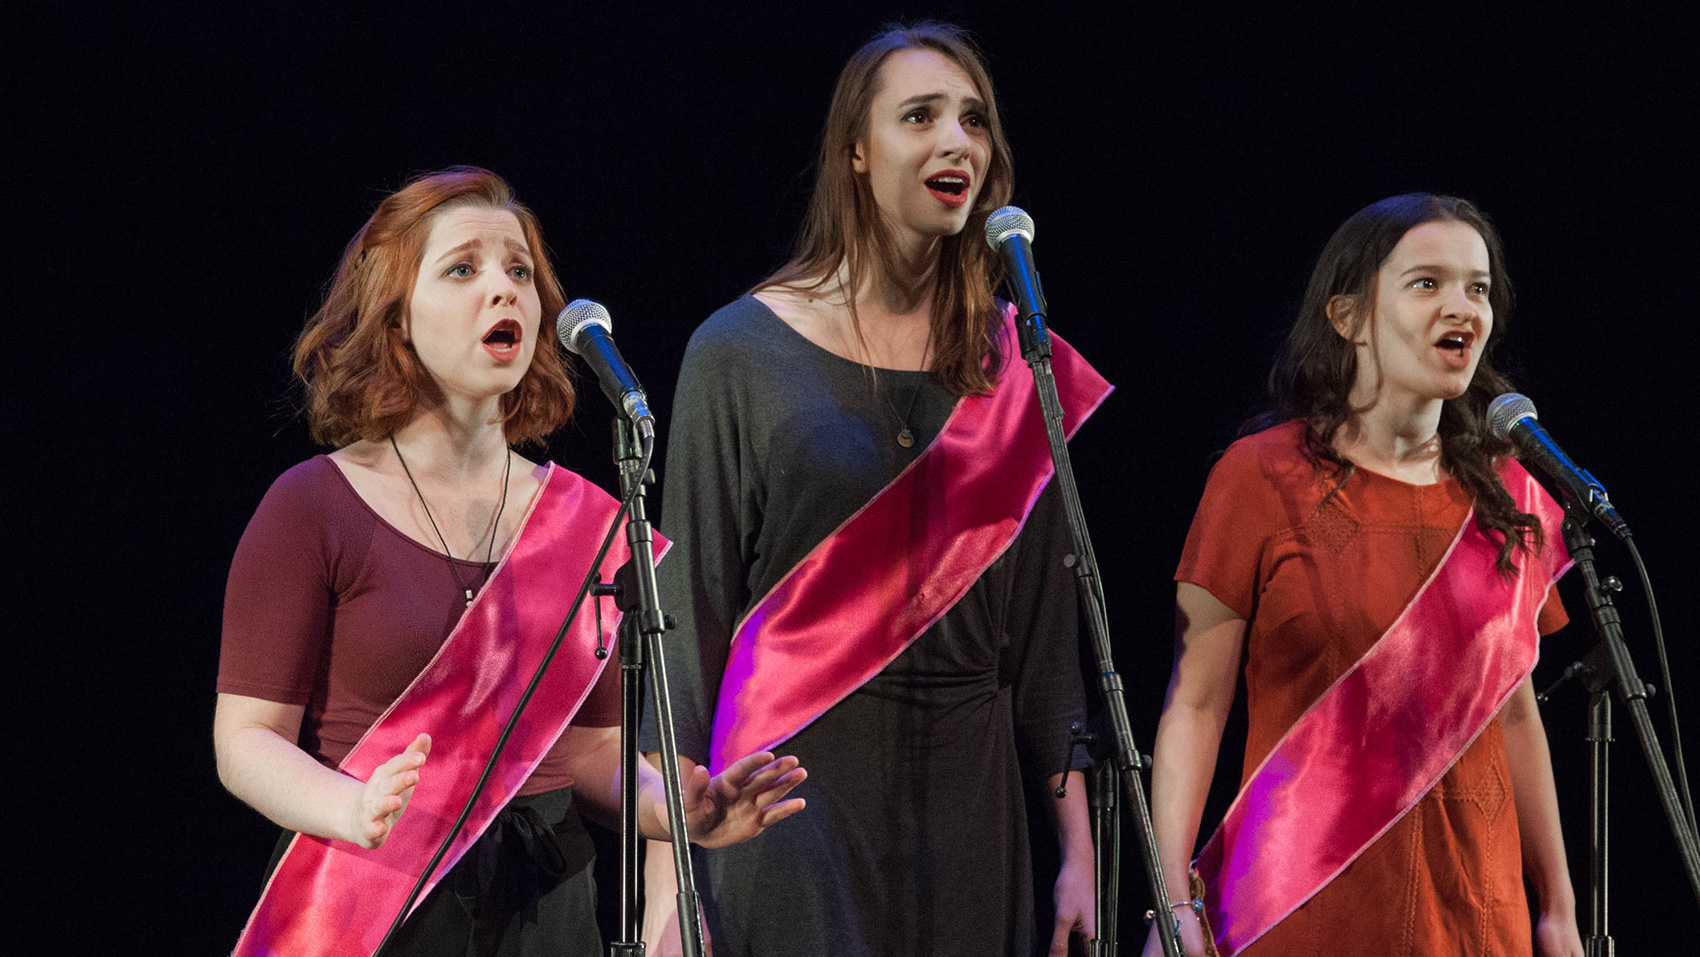 Three women stand in a group singing, each wearing a silky red sash across their body. The woman on the far left has a face of slight worry, the middle woman seems hopeful and the woman on the right has a face of excitement/tenacity